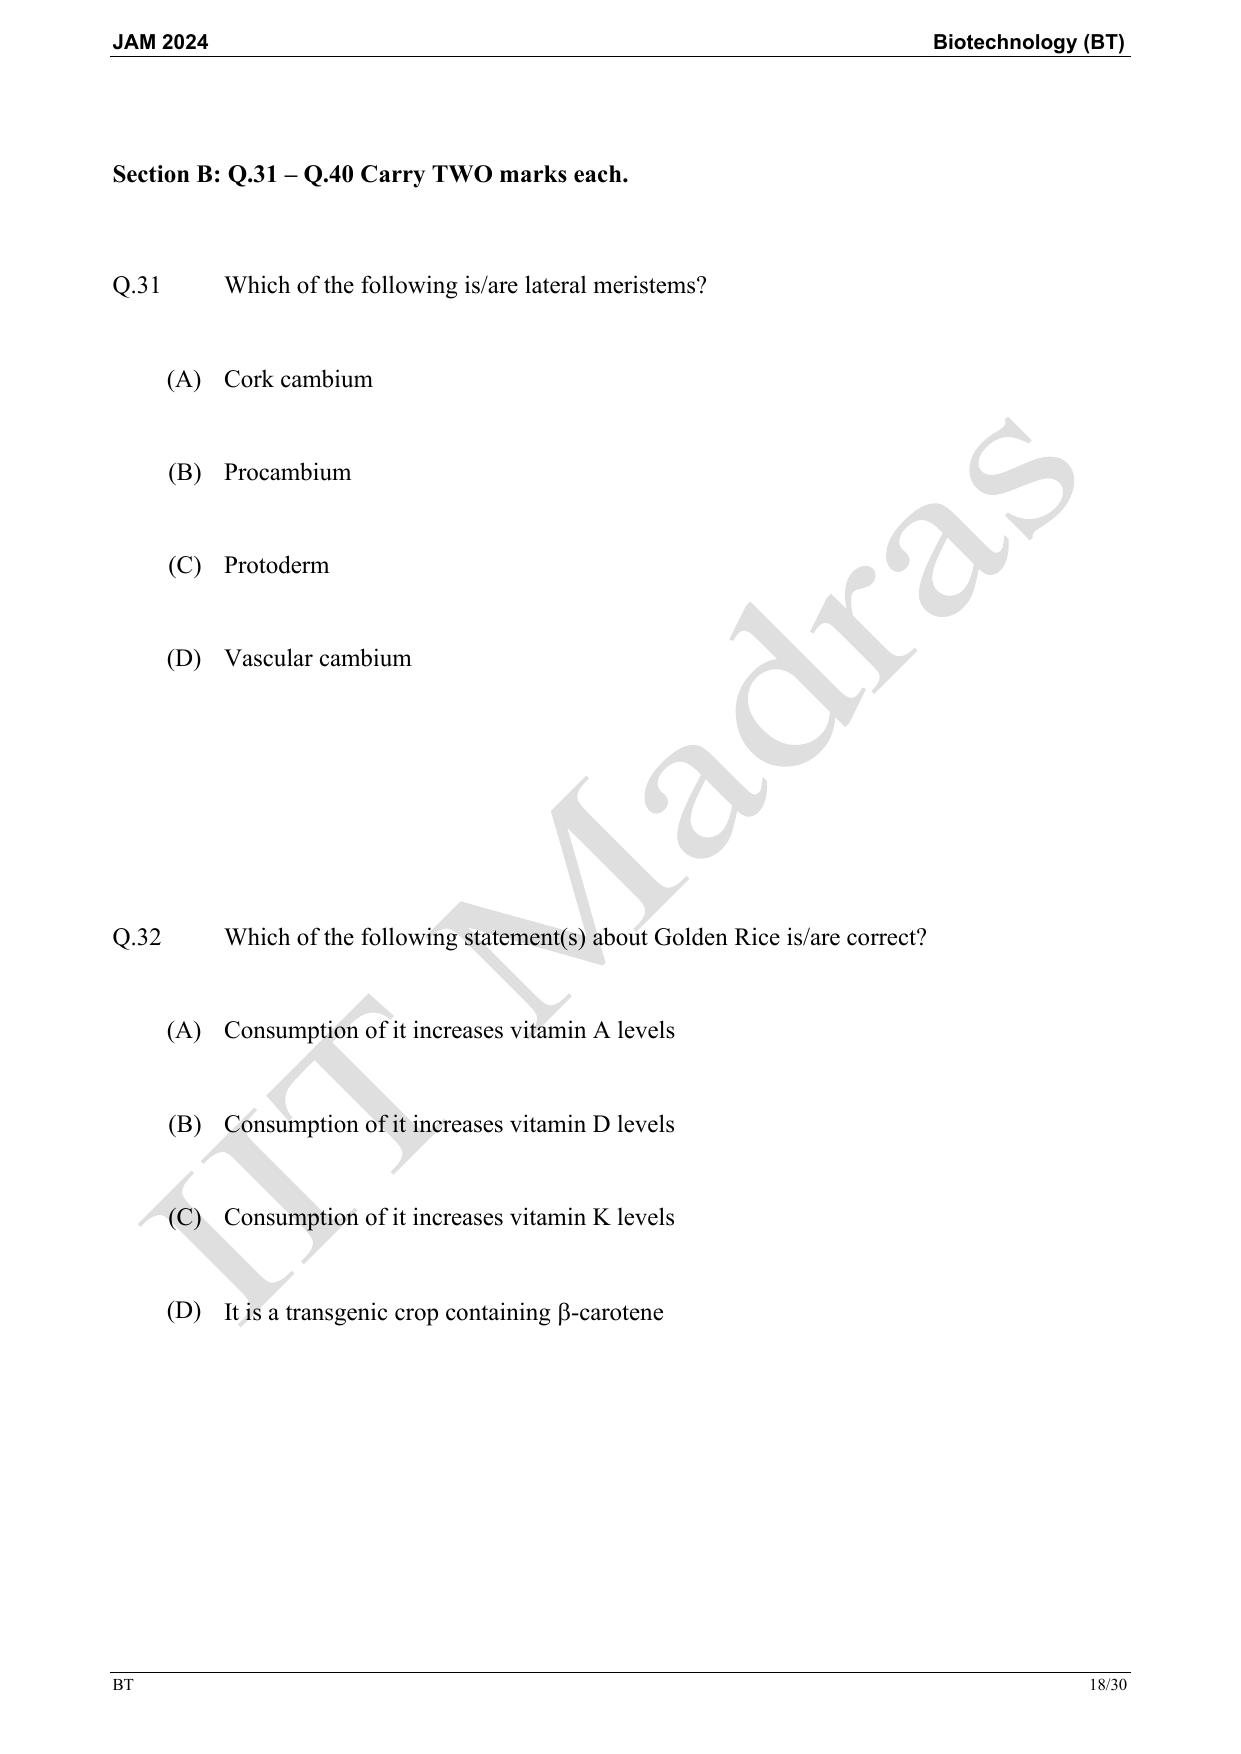 IIT JAM 2024 Biotechnology (BT) Master Question Paper - Page 18